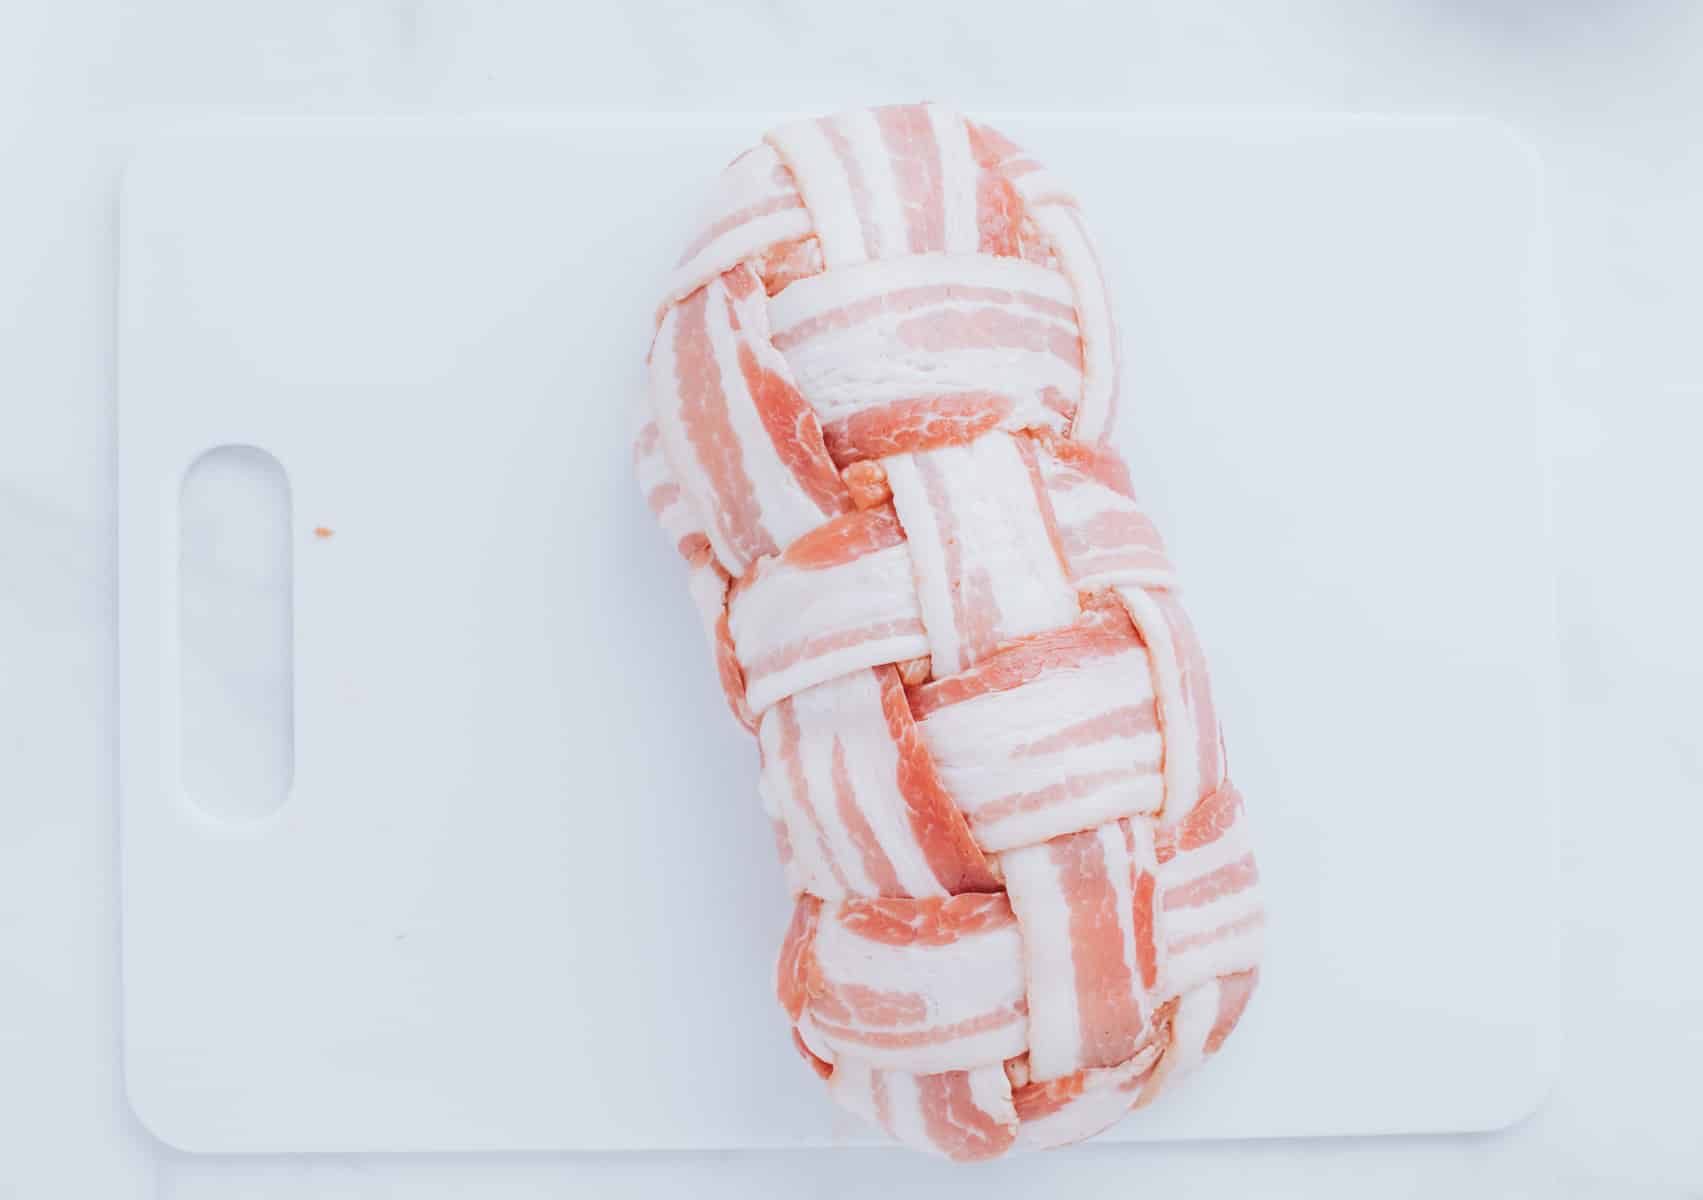 sausage fully wrapped by bacon